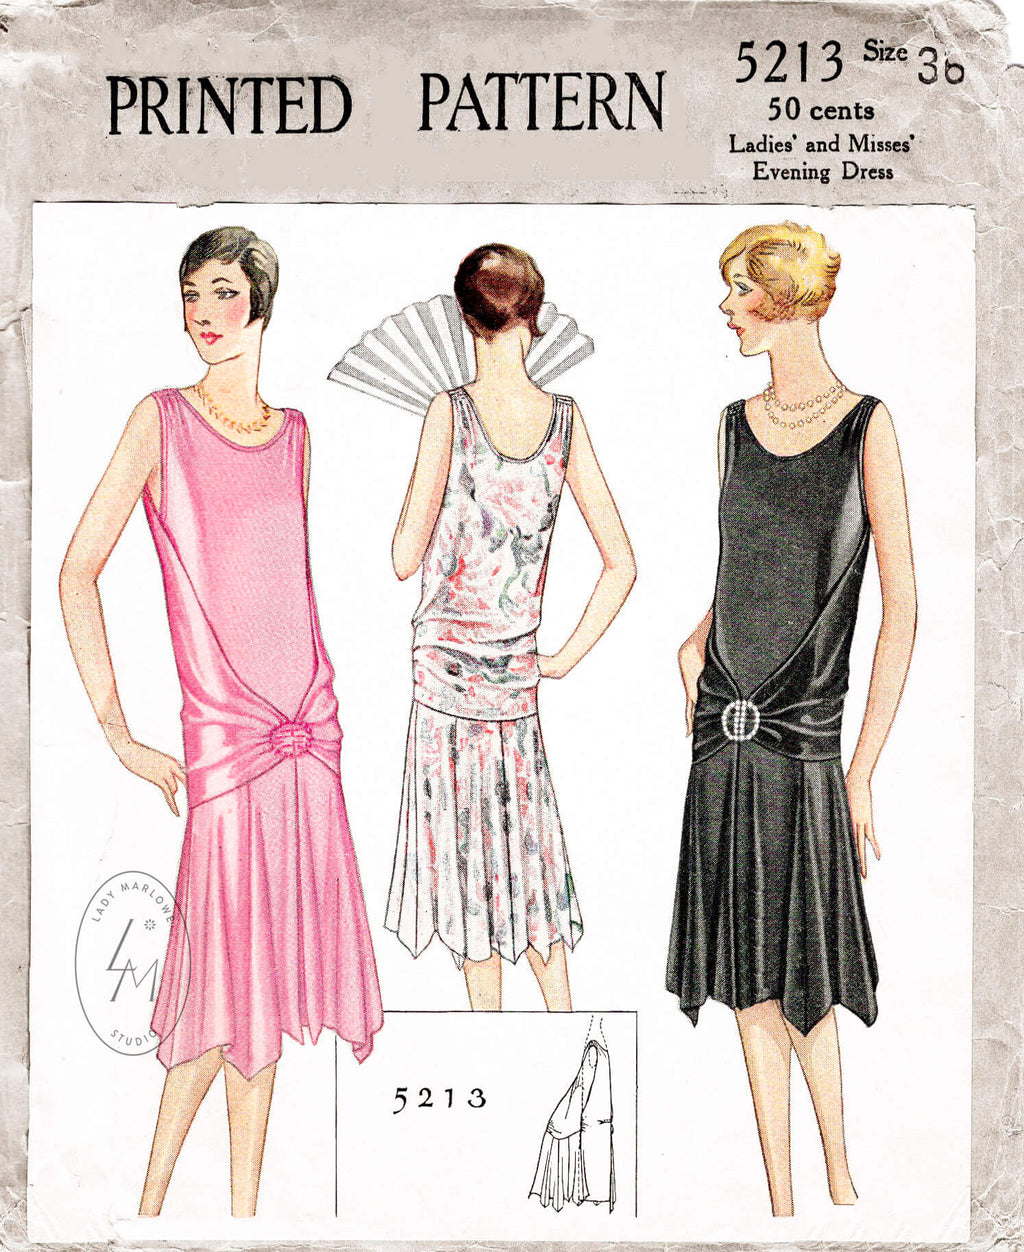 Evening wear: 1930-1940s women | Fashion and Decor: A Cultural History